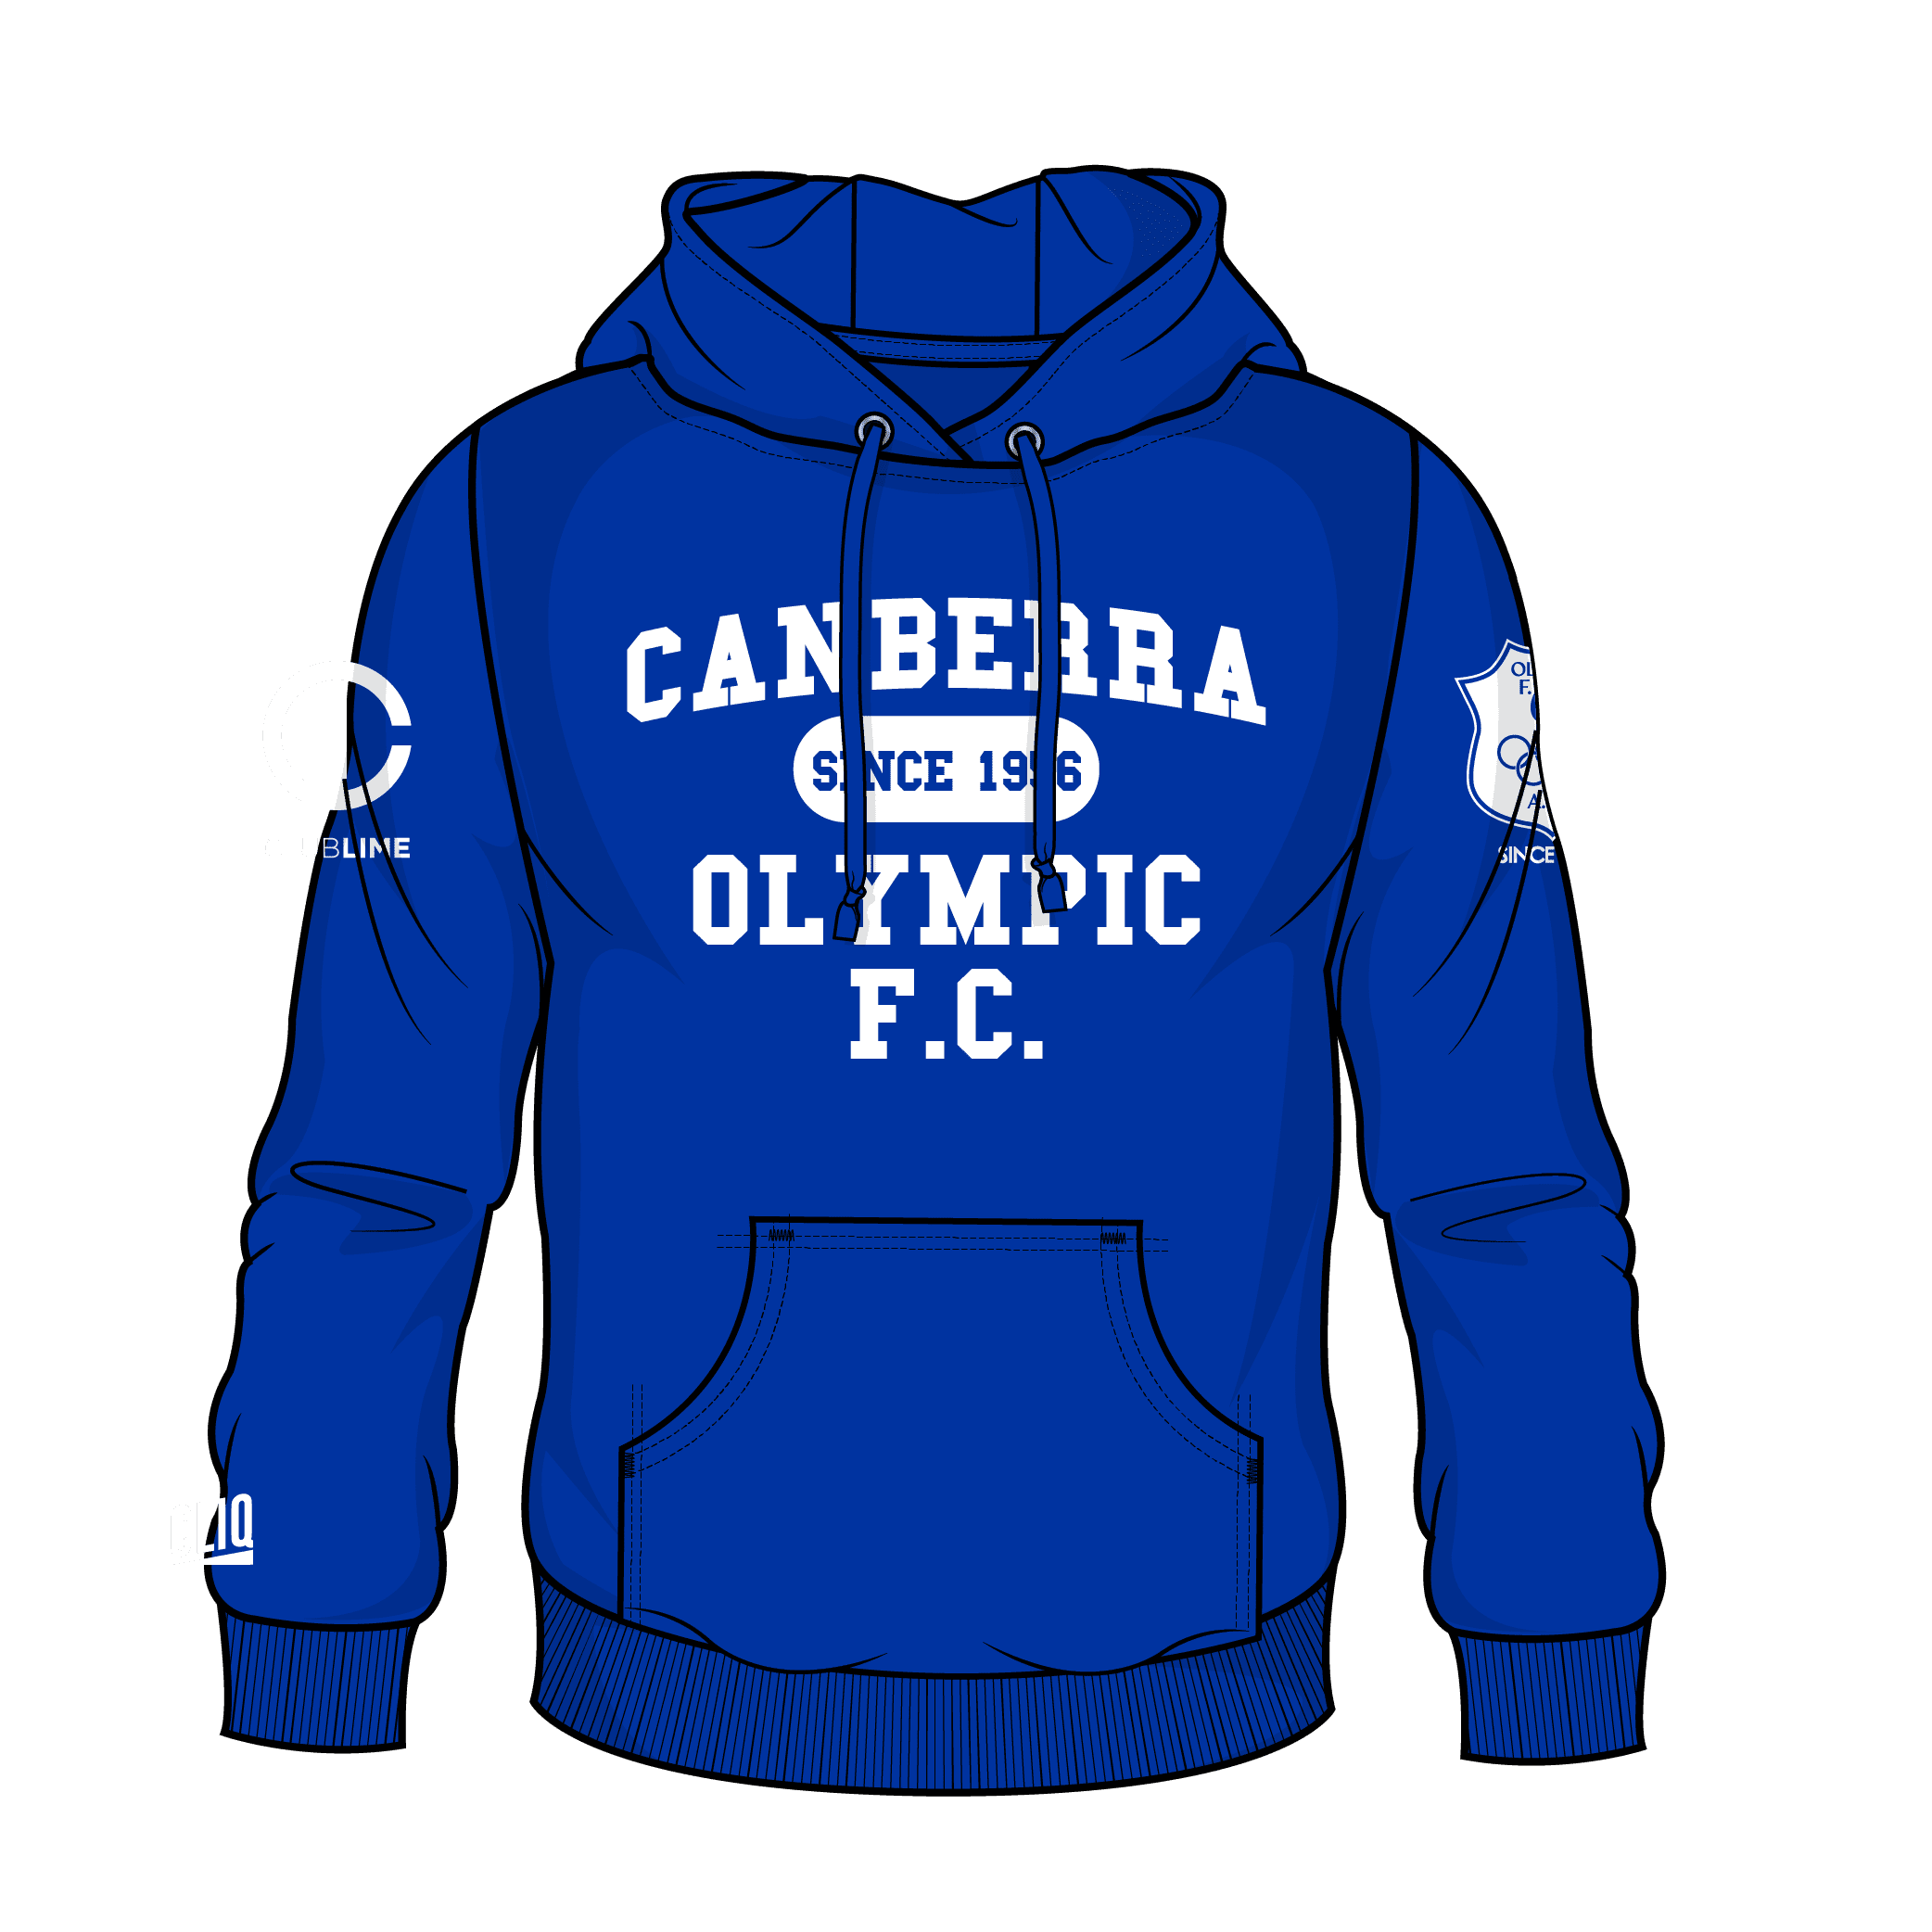 Canberra Olympic FC Web Images 04